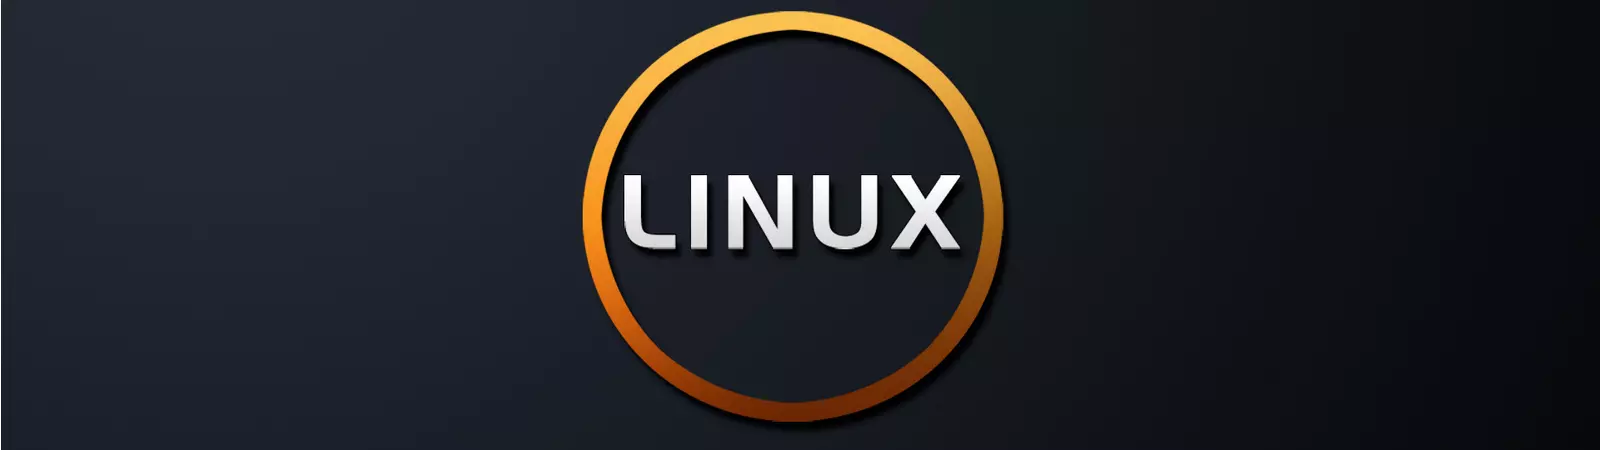 linux_category